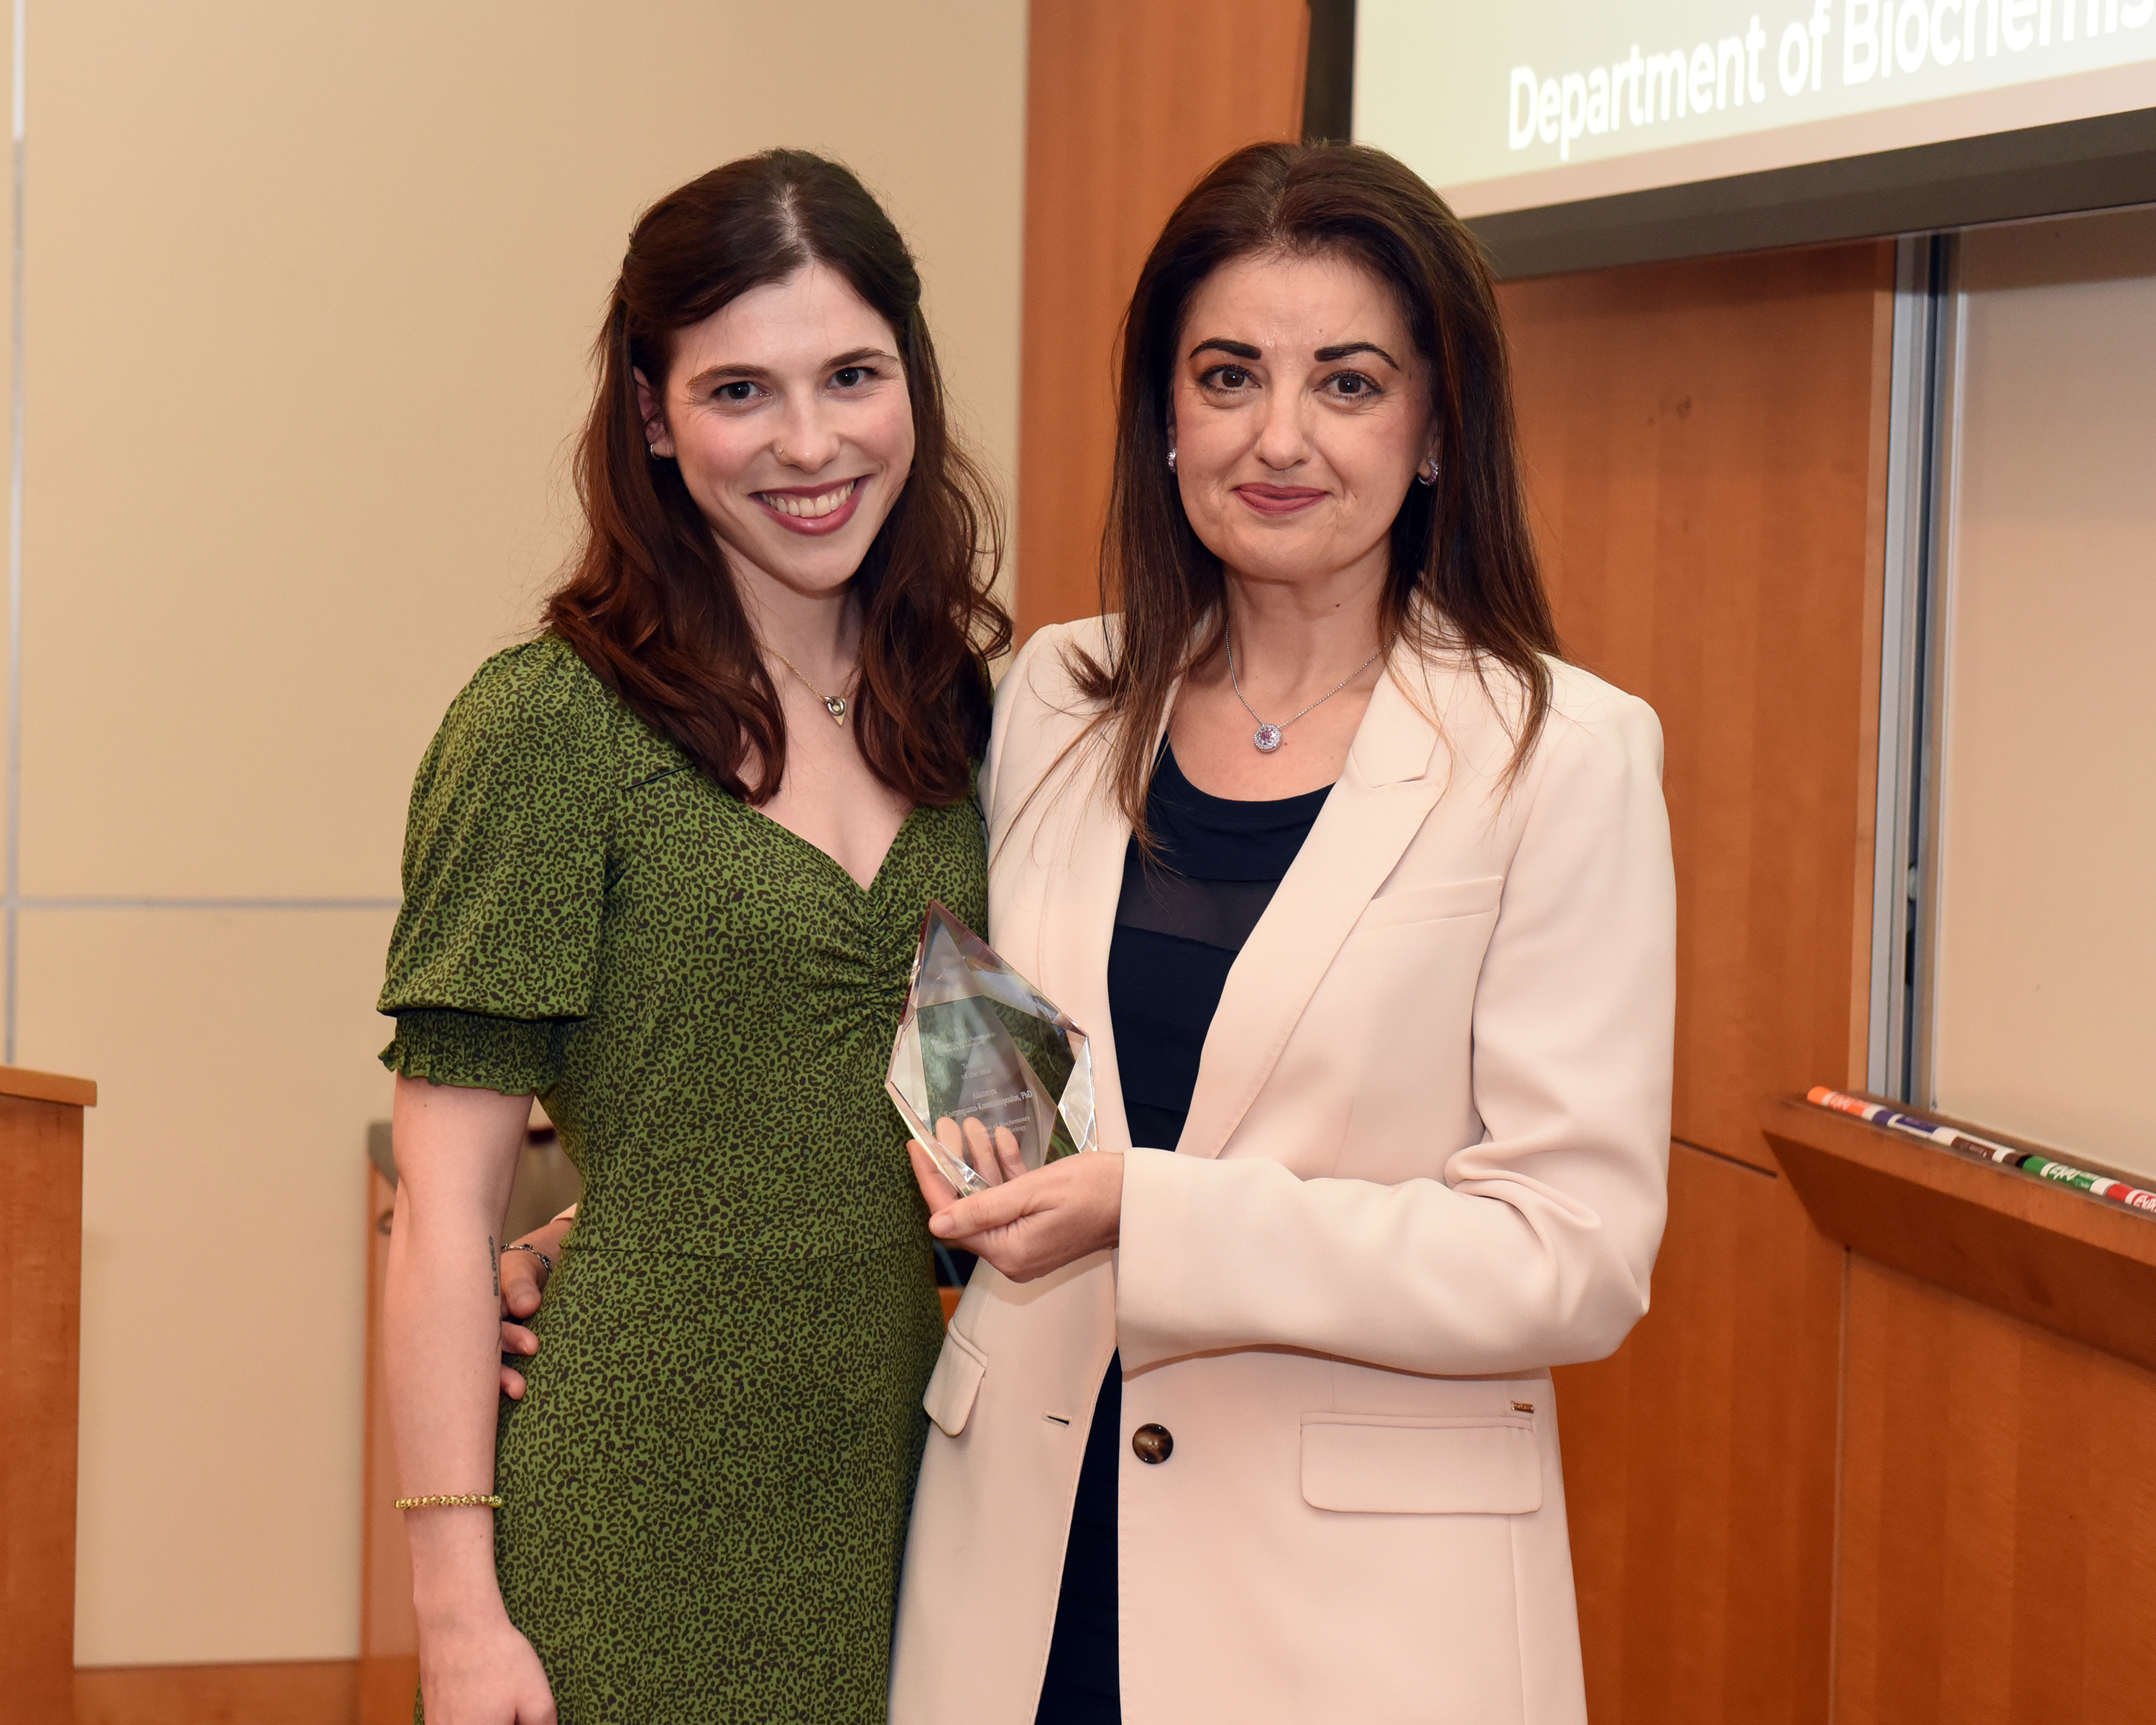 Annie Brong and Dr. Aikaterini Kontrogianni-Konstantopoulos stand together. Dr. Aikaterini Kontrogianni-Konstantopoulos is holding her Teacher of the Year Award.